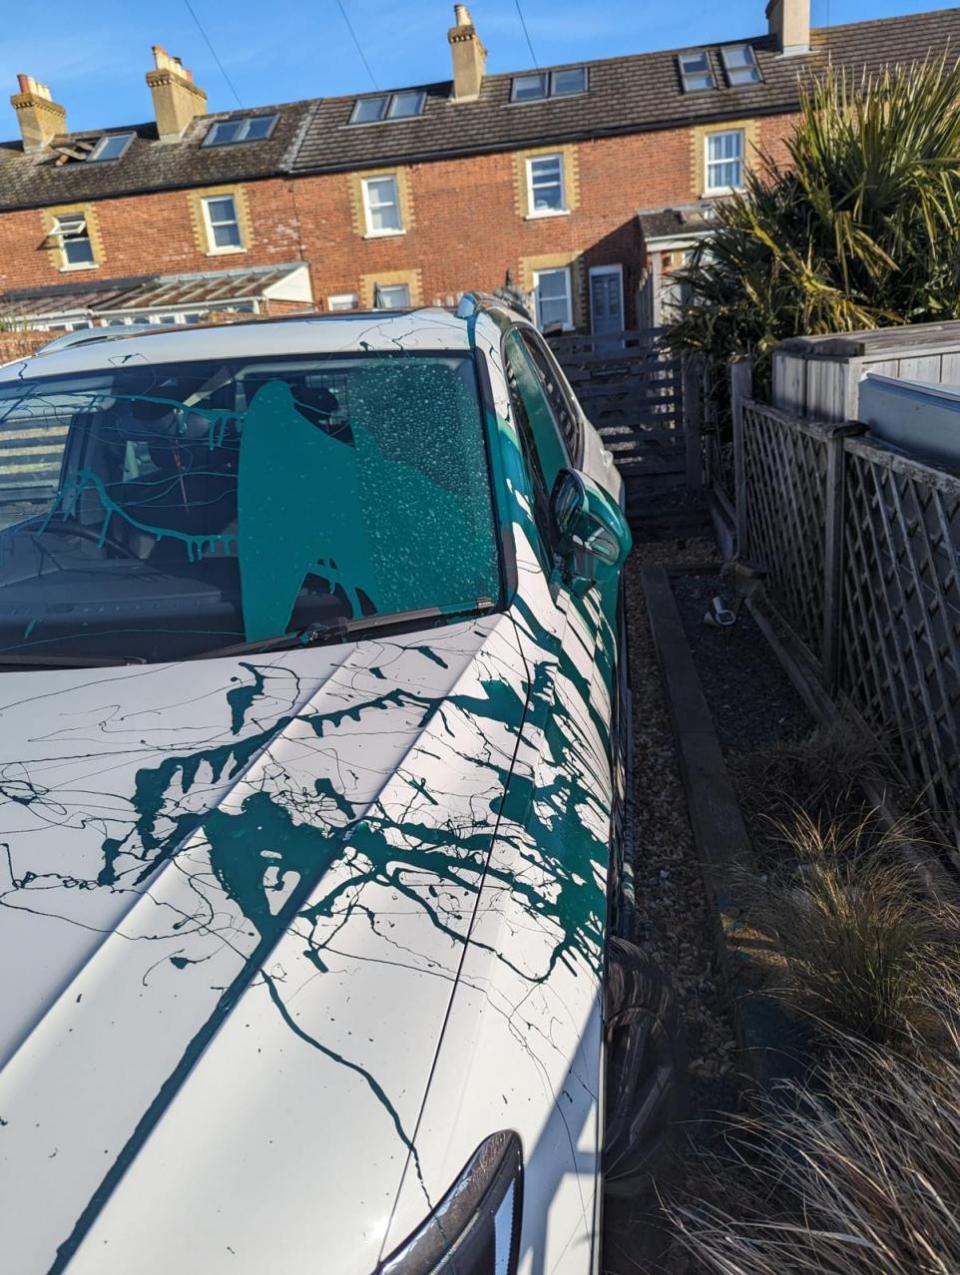 Bournemouth Echo: The paint has caused irreparable damage to her vehicle, causing concerns that the car may be